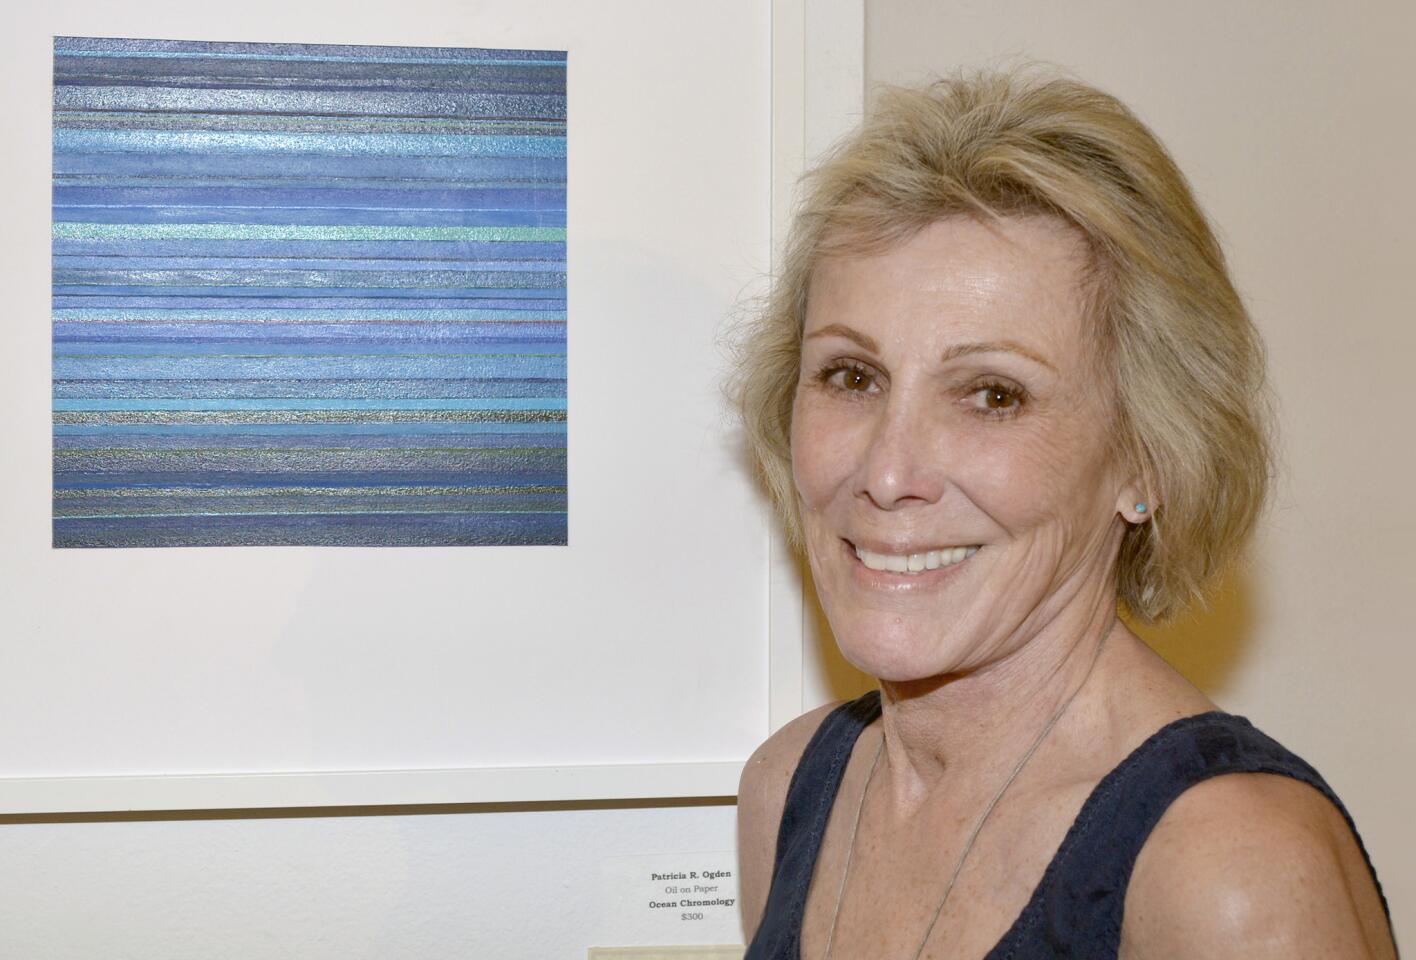 Patricia Ogdon's oil on paper presentation of "Ocean Chromology" took second place honors at Friday's opening night reception of "Hot & Cold."